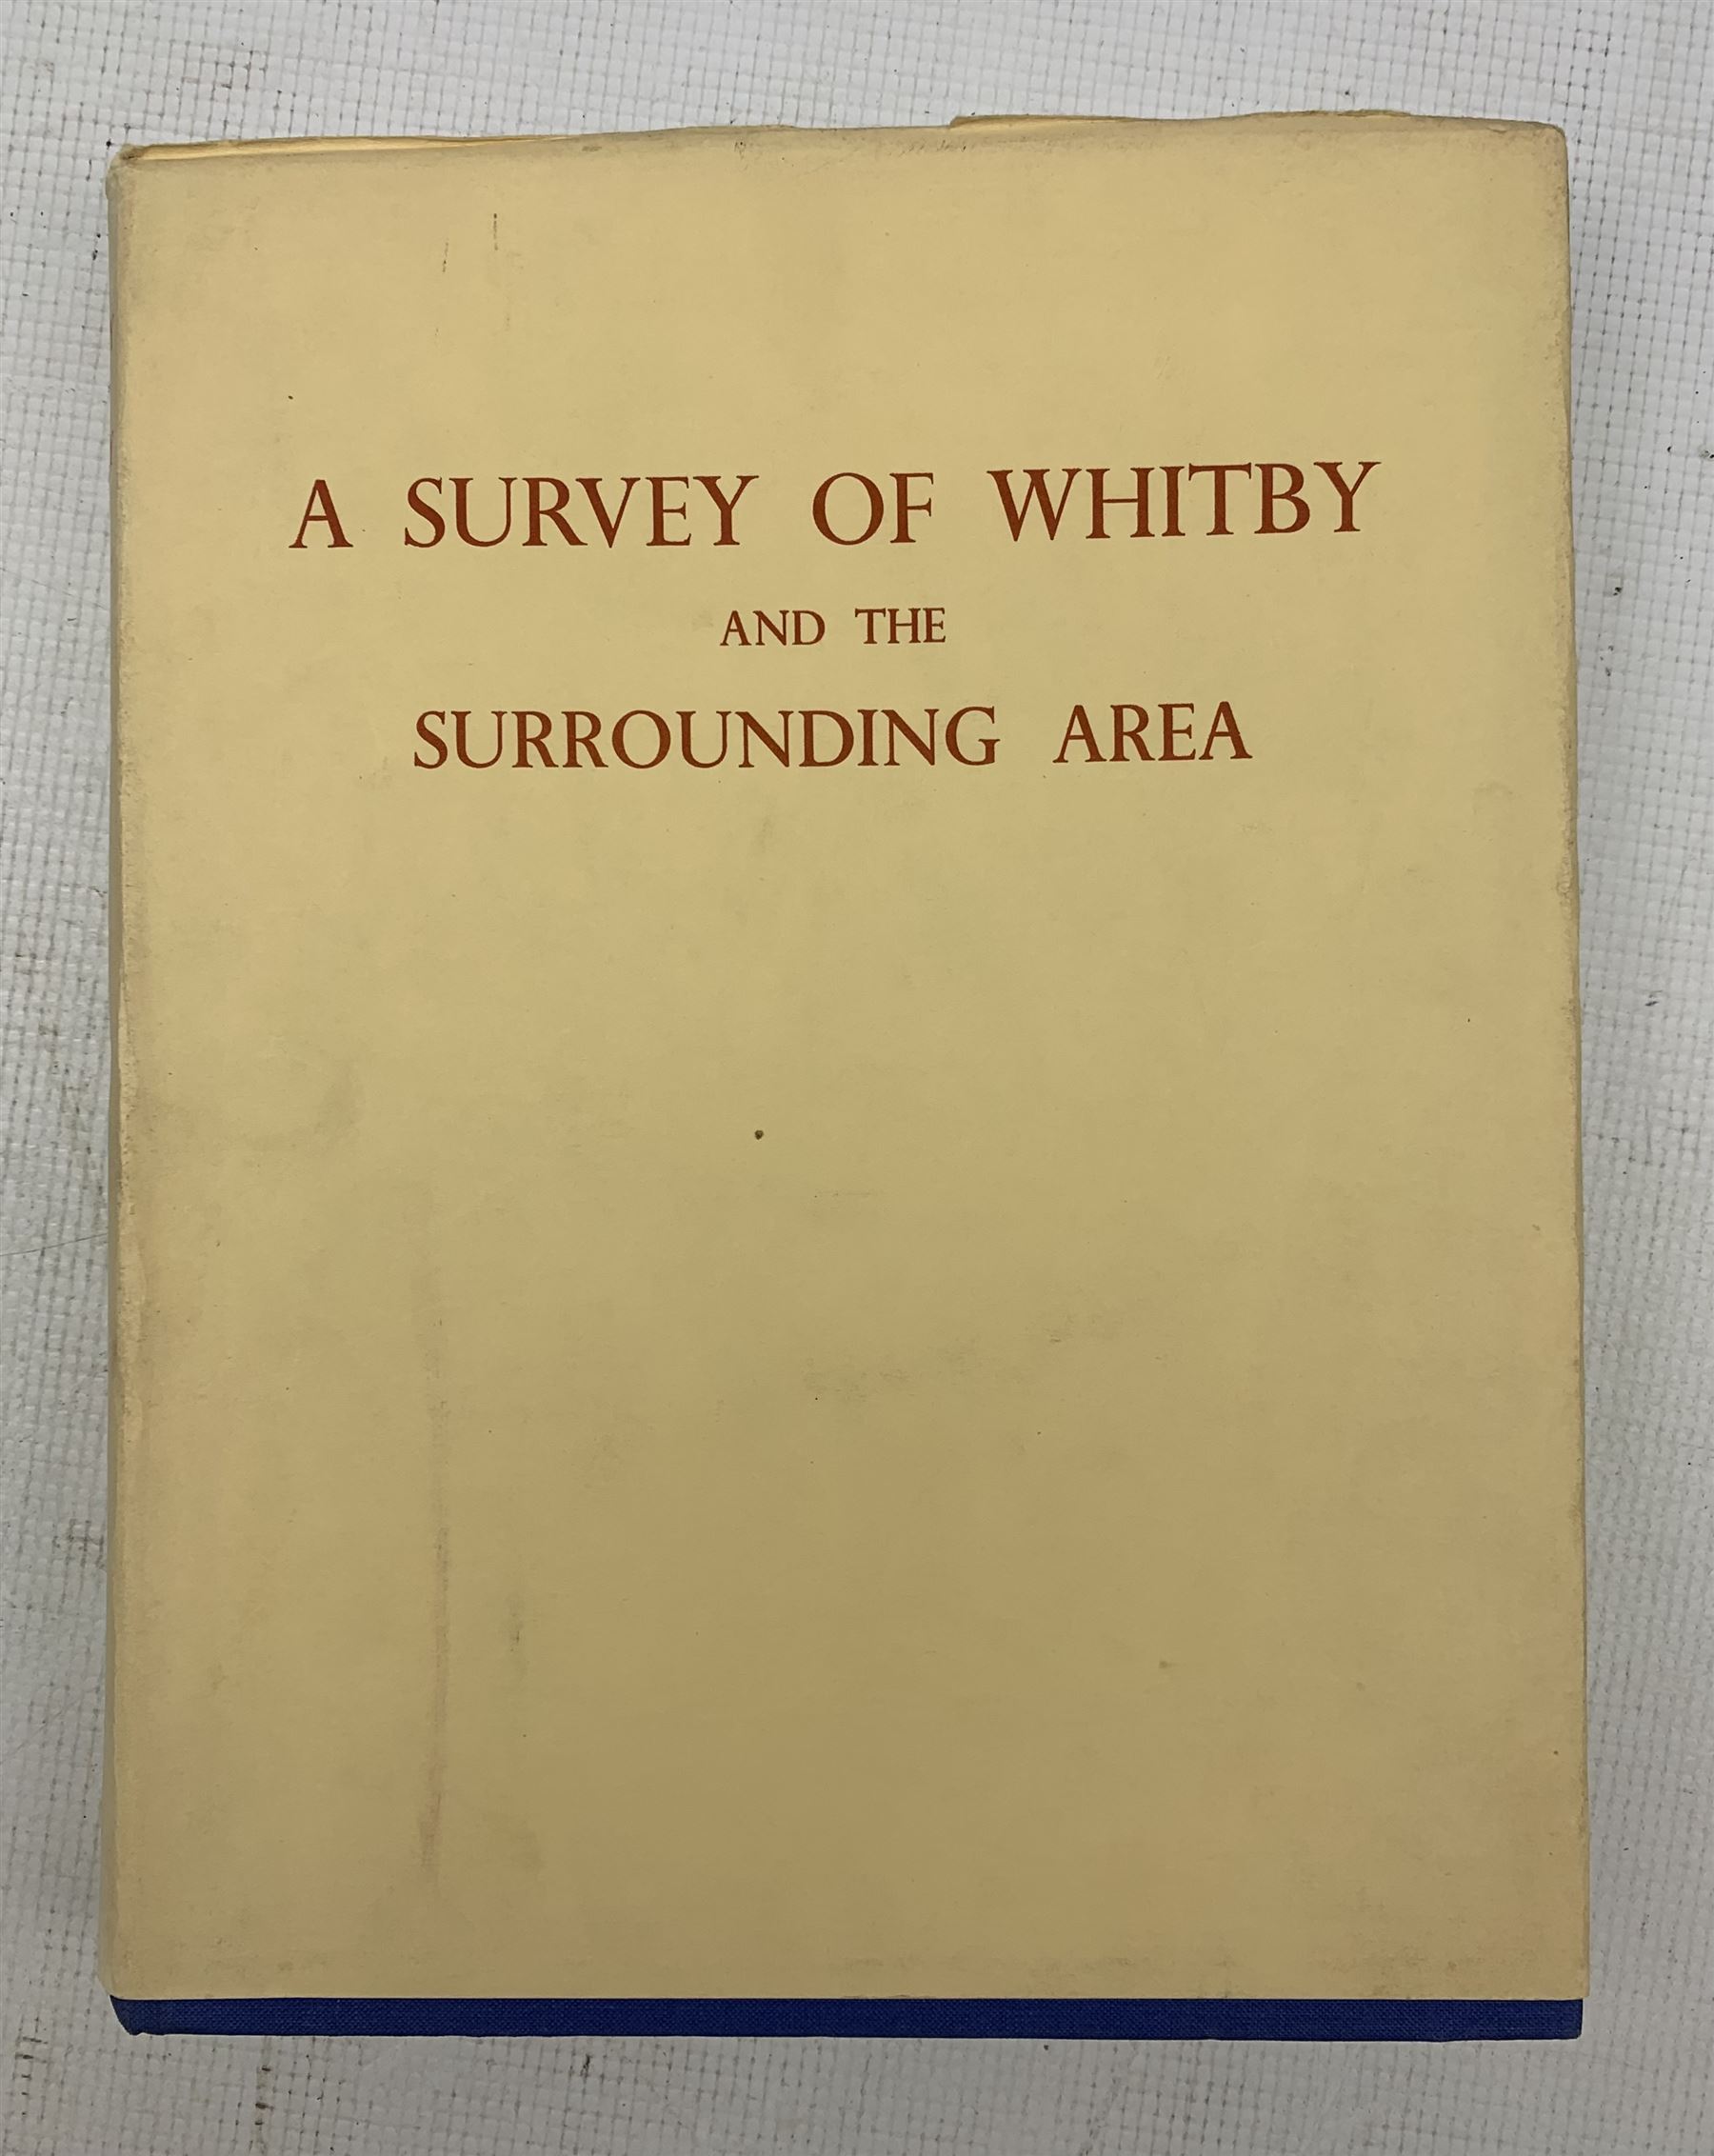 G.H.J.Daysh - A Survey of Whitby and the Surrounding Area - Image 2 of 4